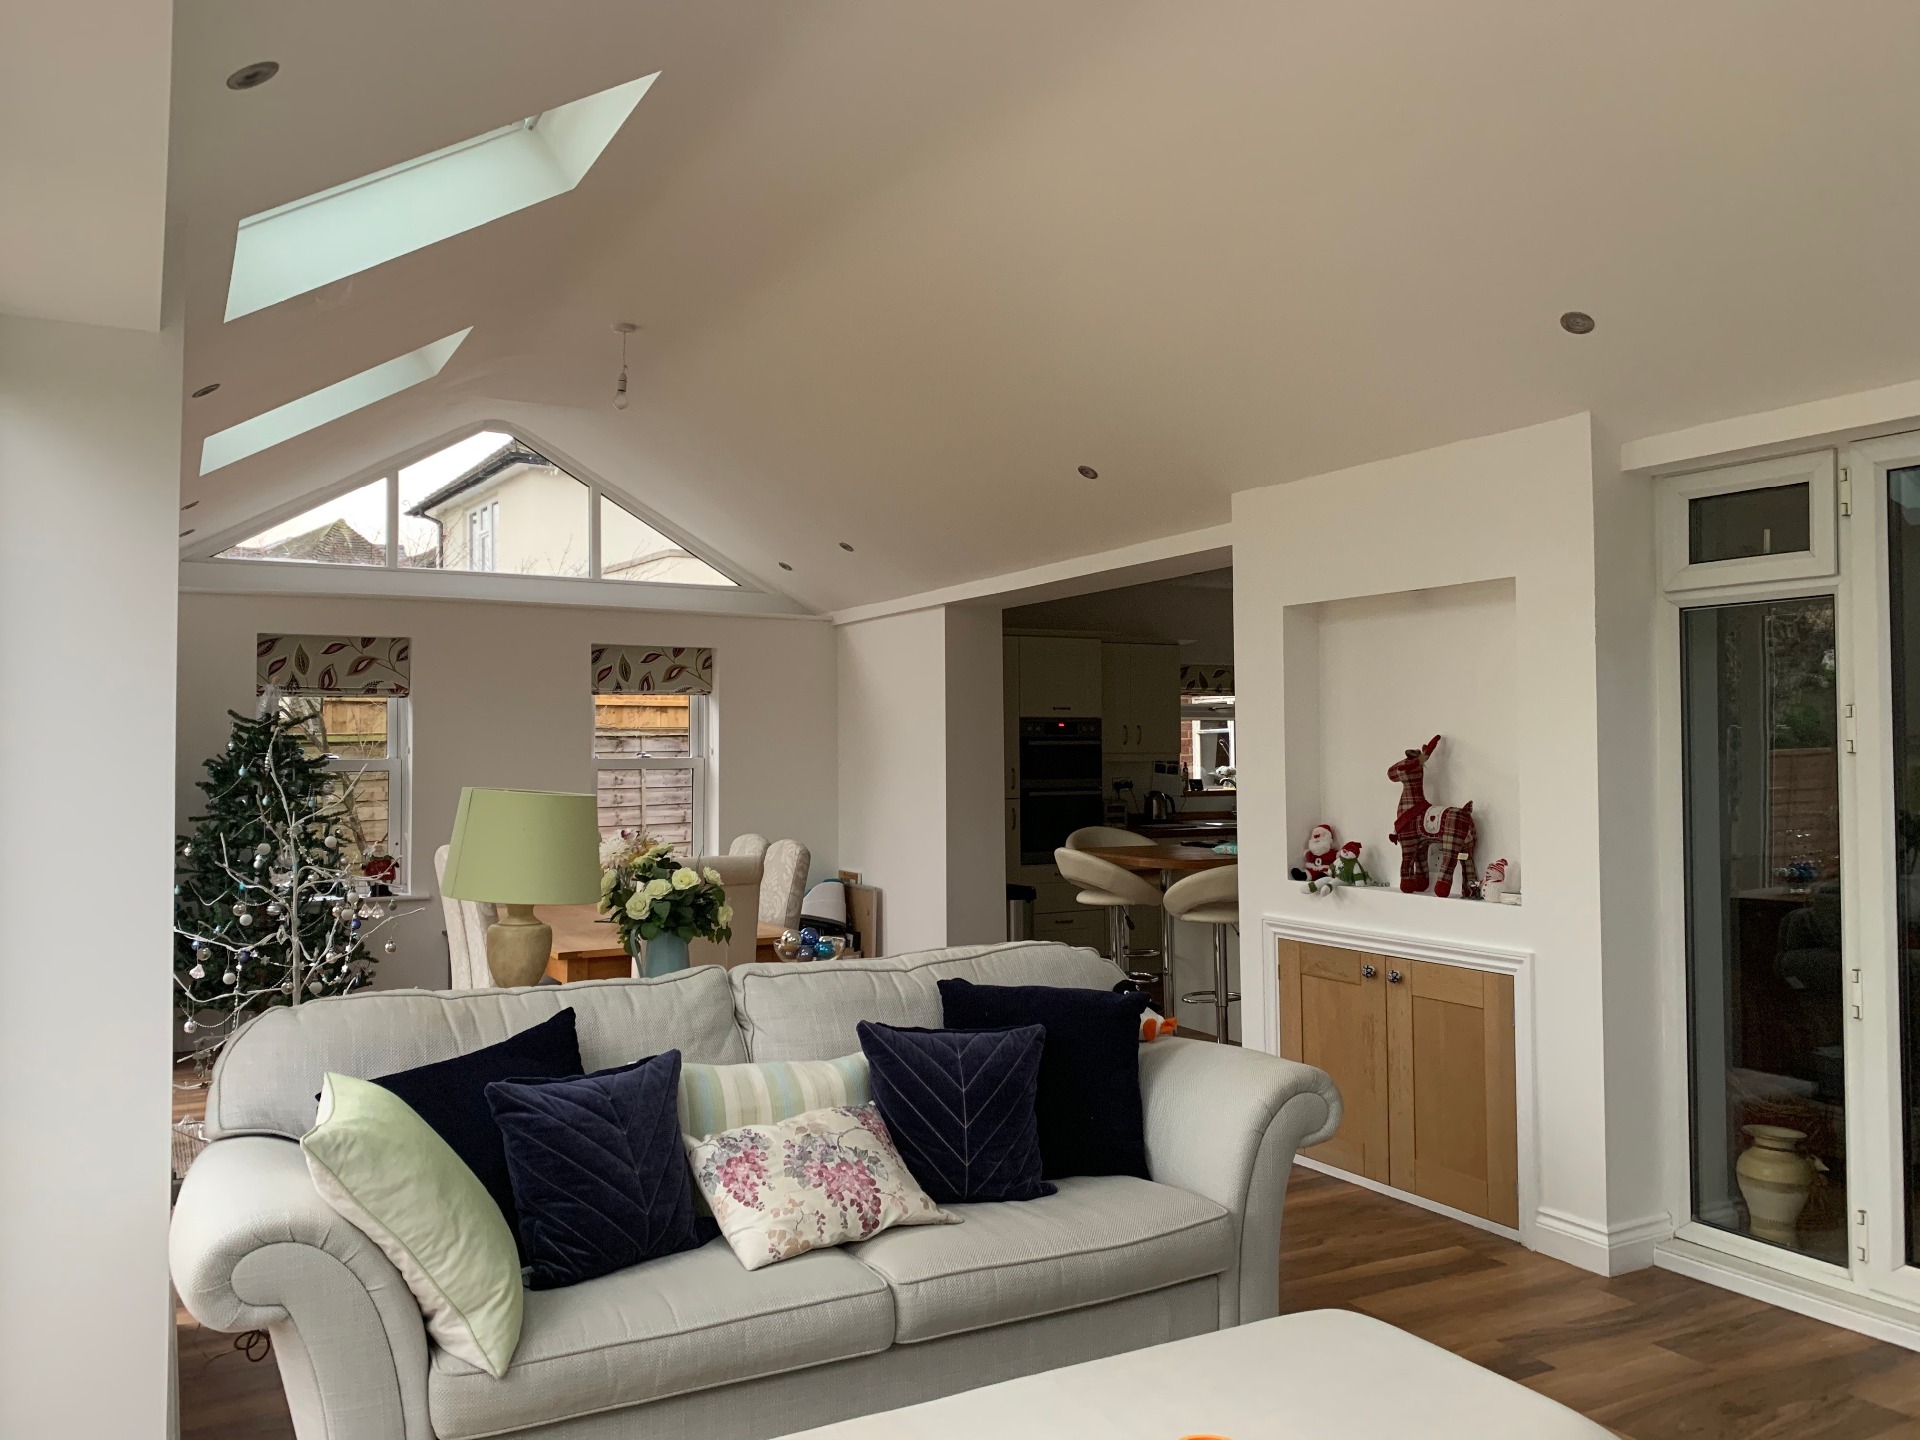 Barton Seagrave internal photo of conservatory roof conversion